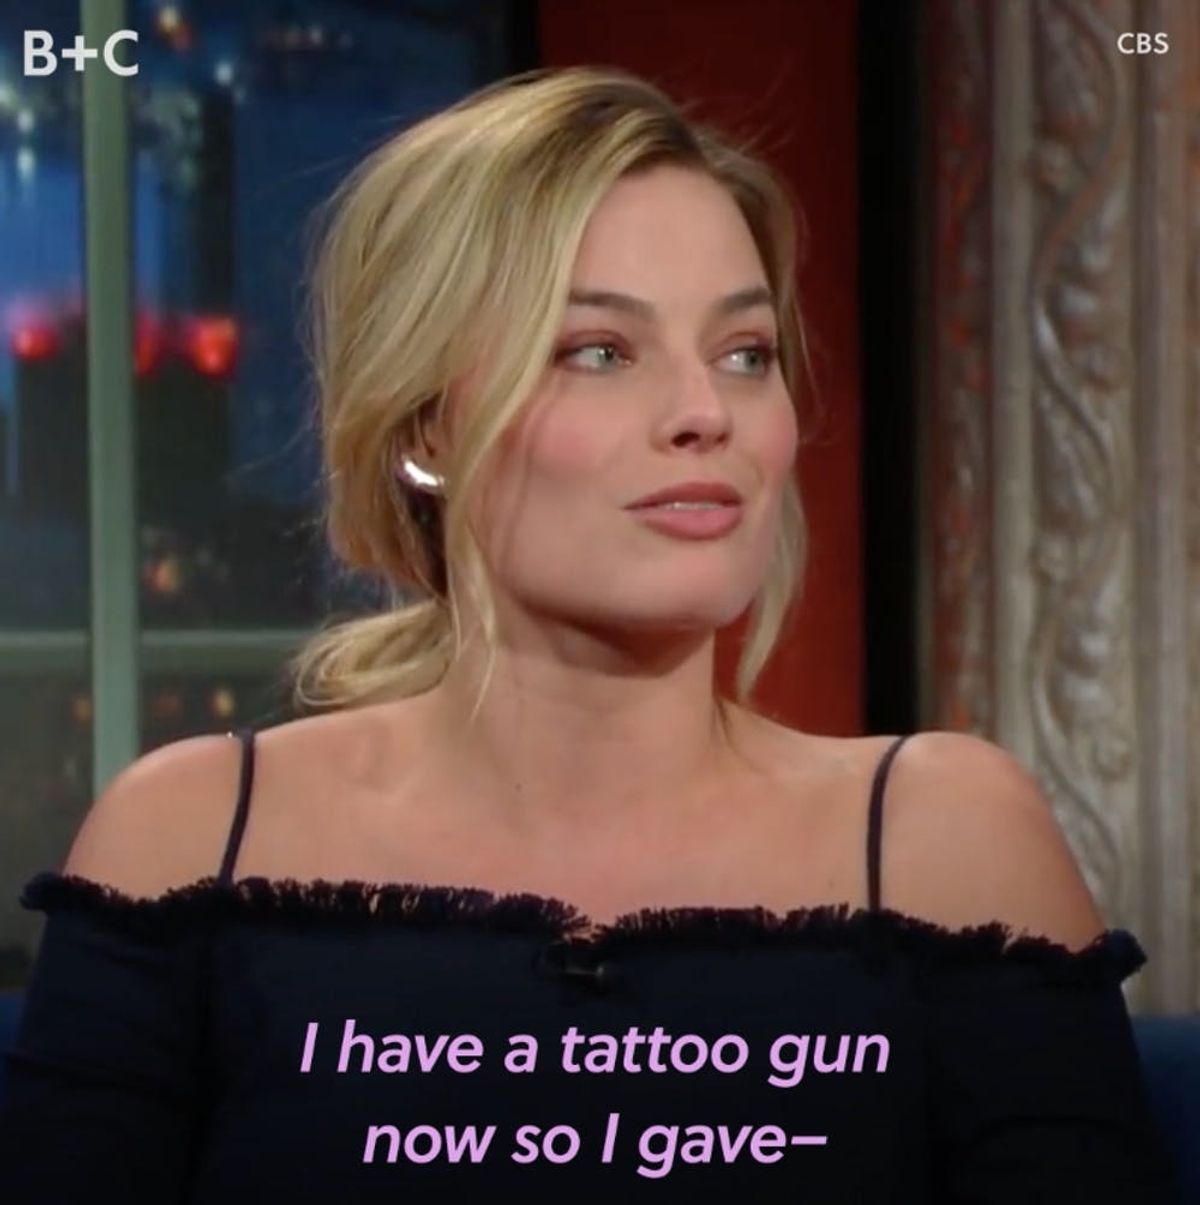 Hanging Out with Margot Robbie Sounds Like an Adventure!